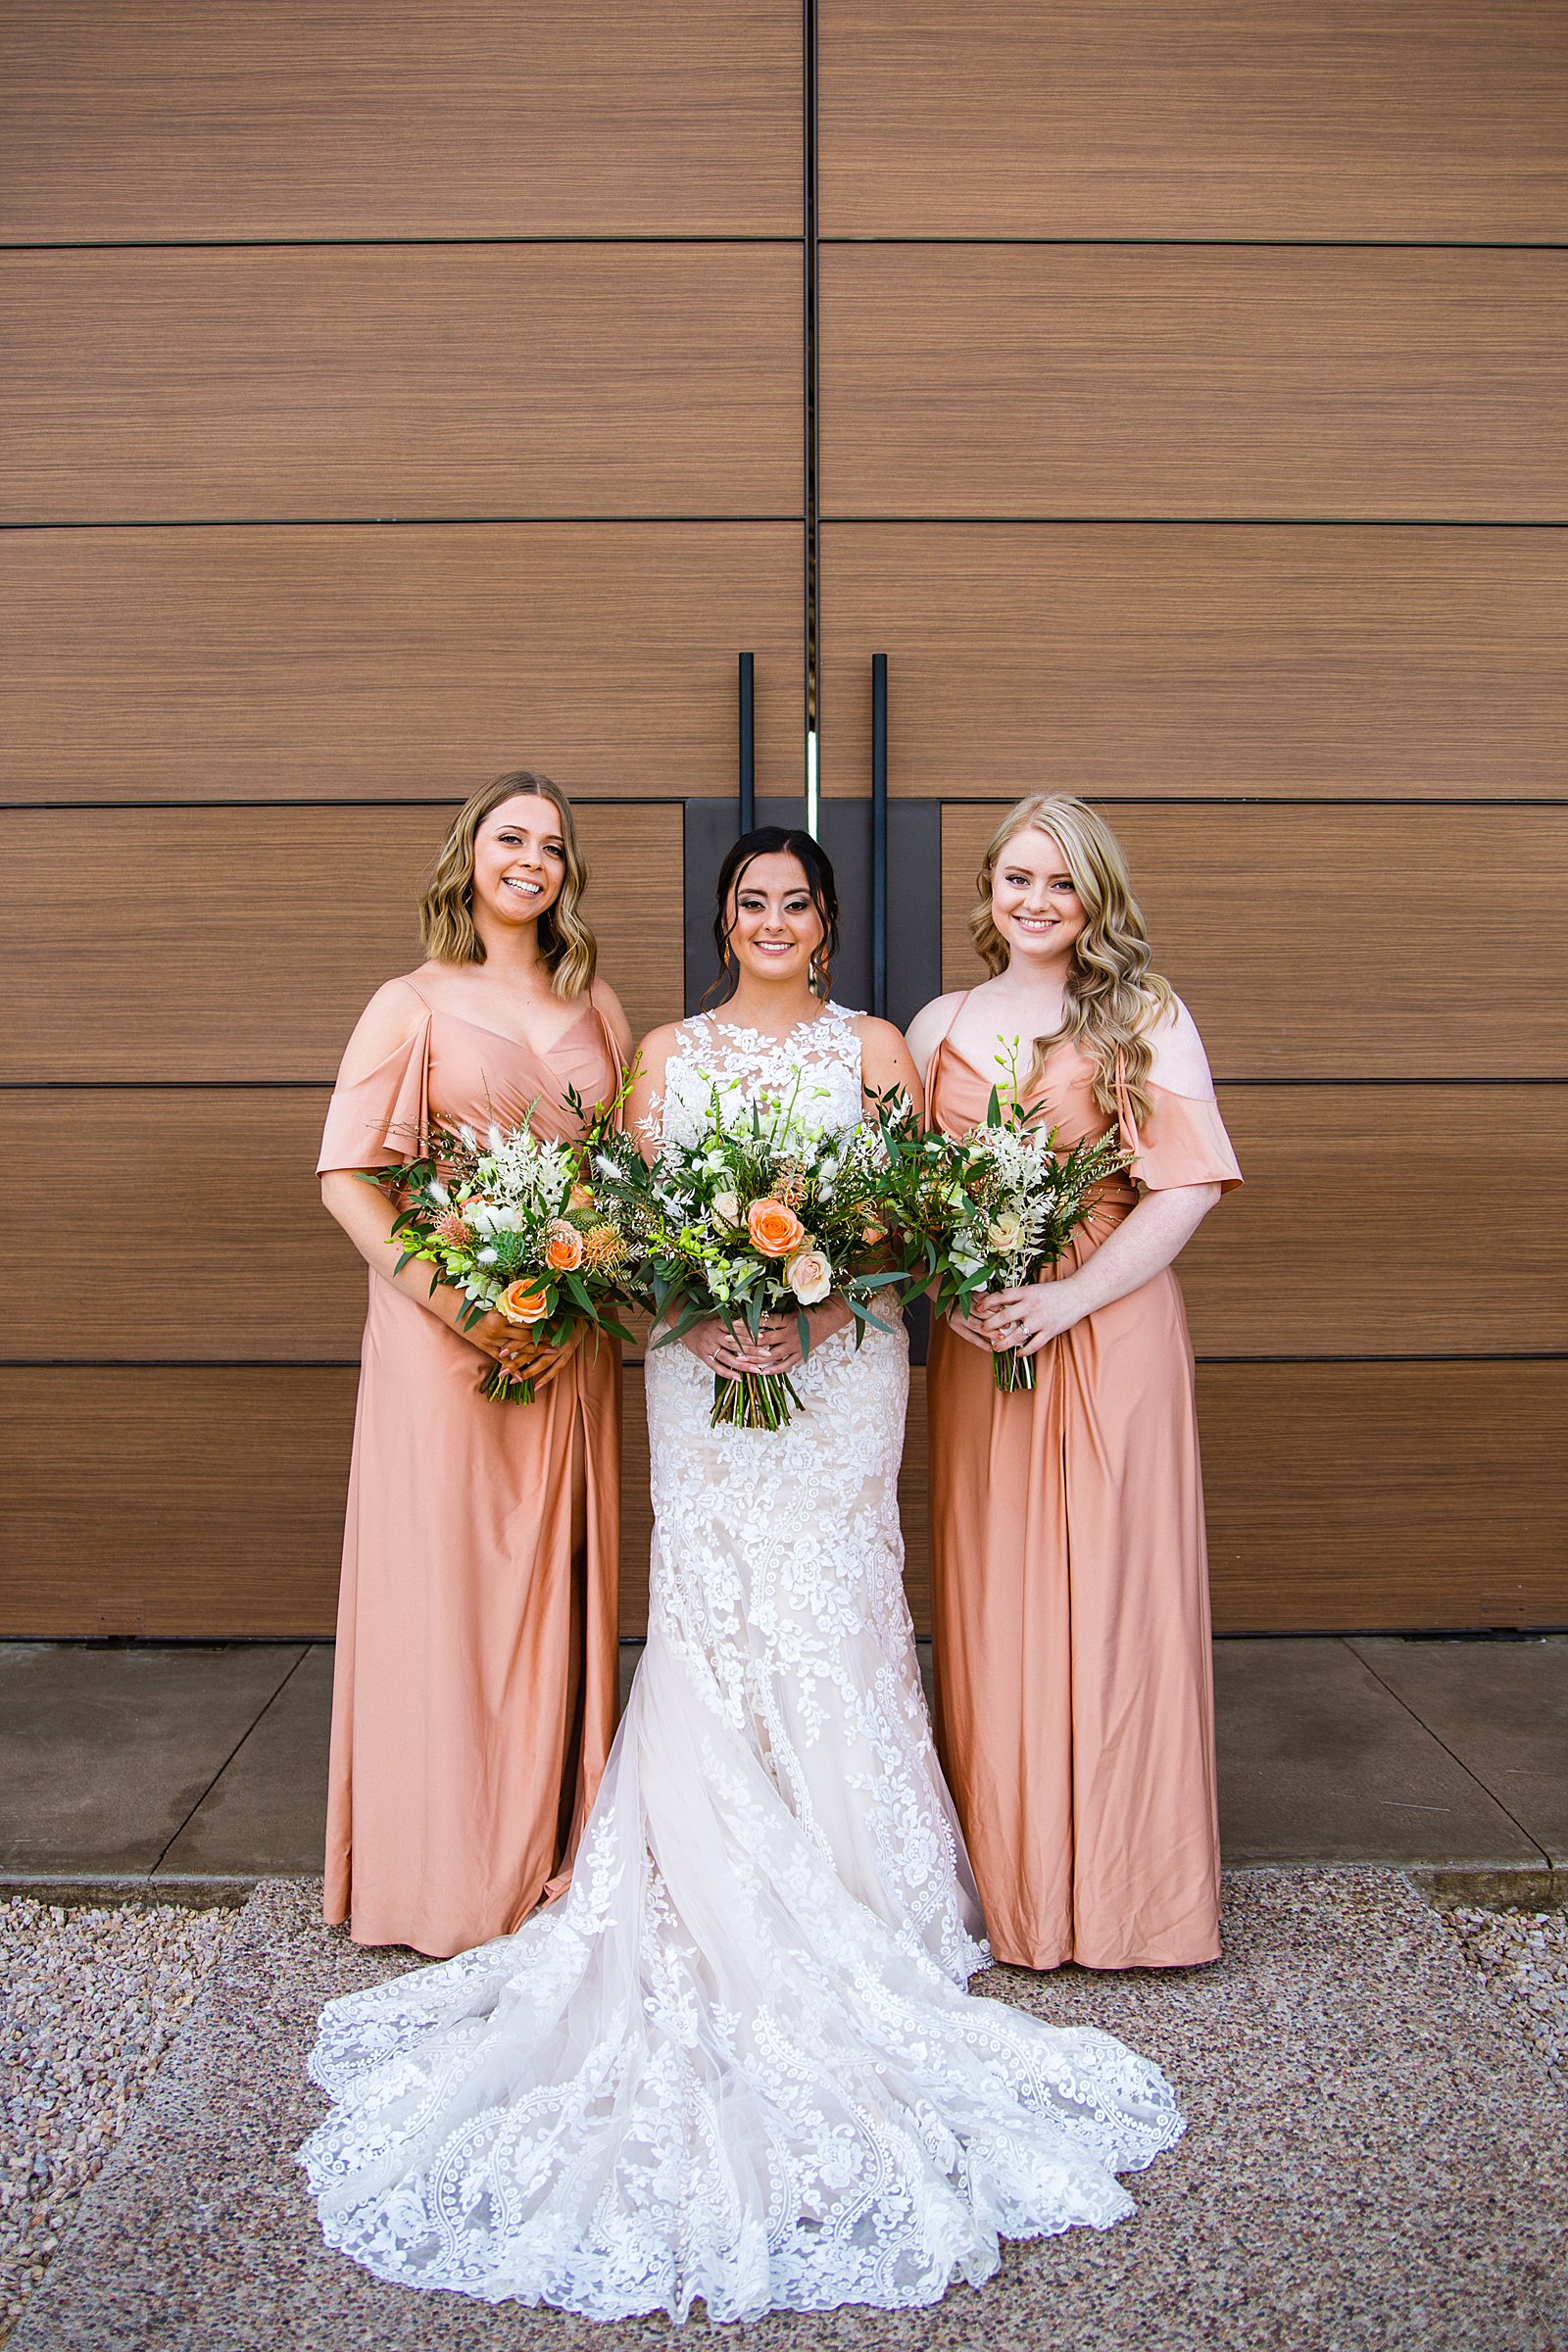 Bride and bridesmaids together at a The Paseo wedding by Arizona wedding photographer PMA Photography.